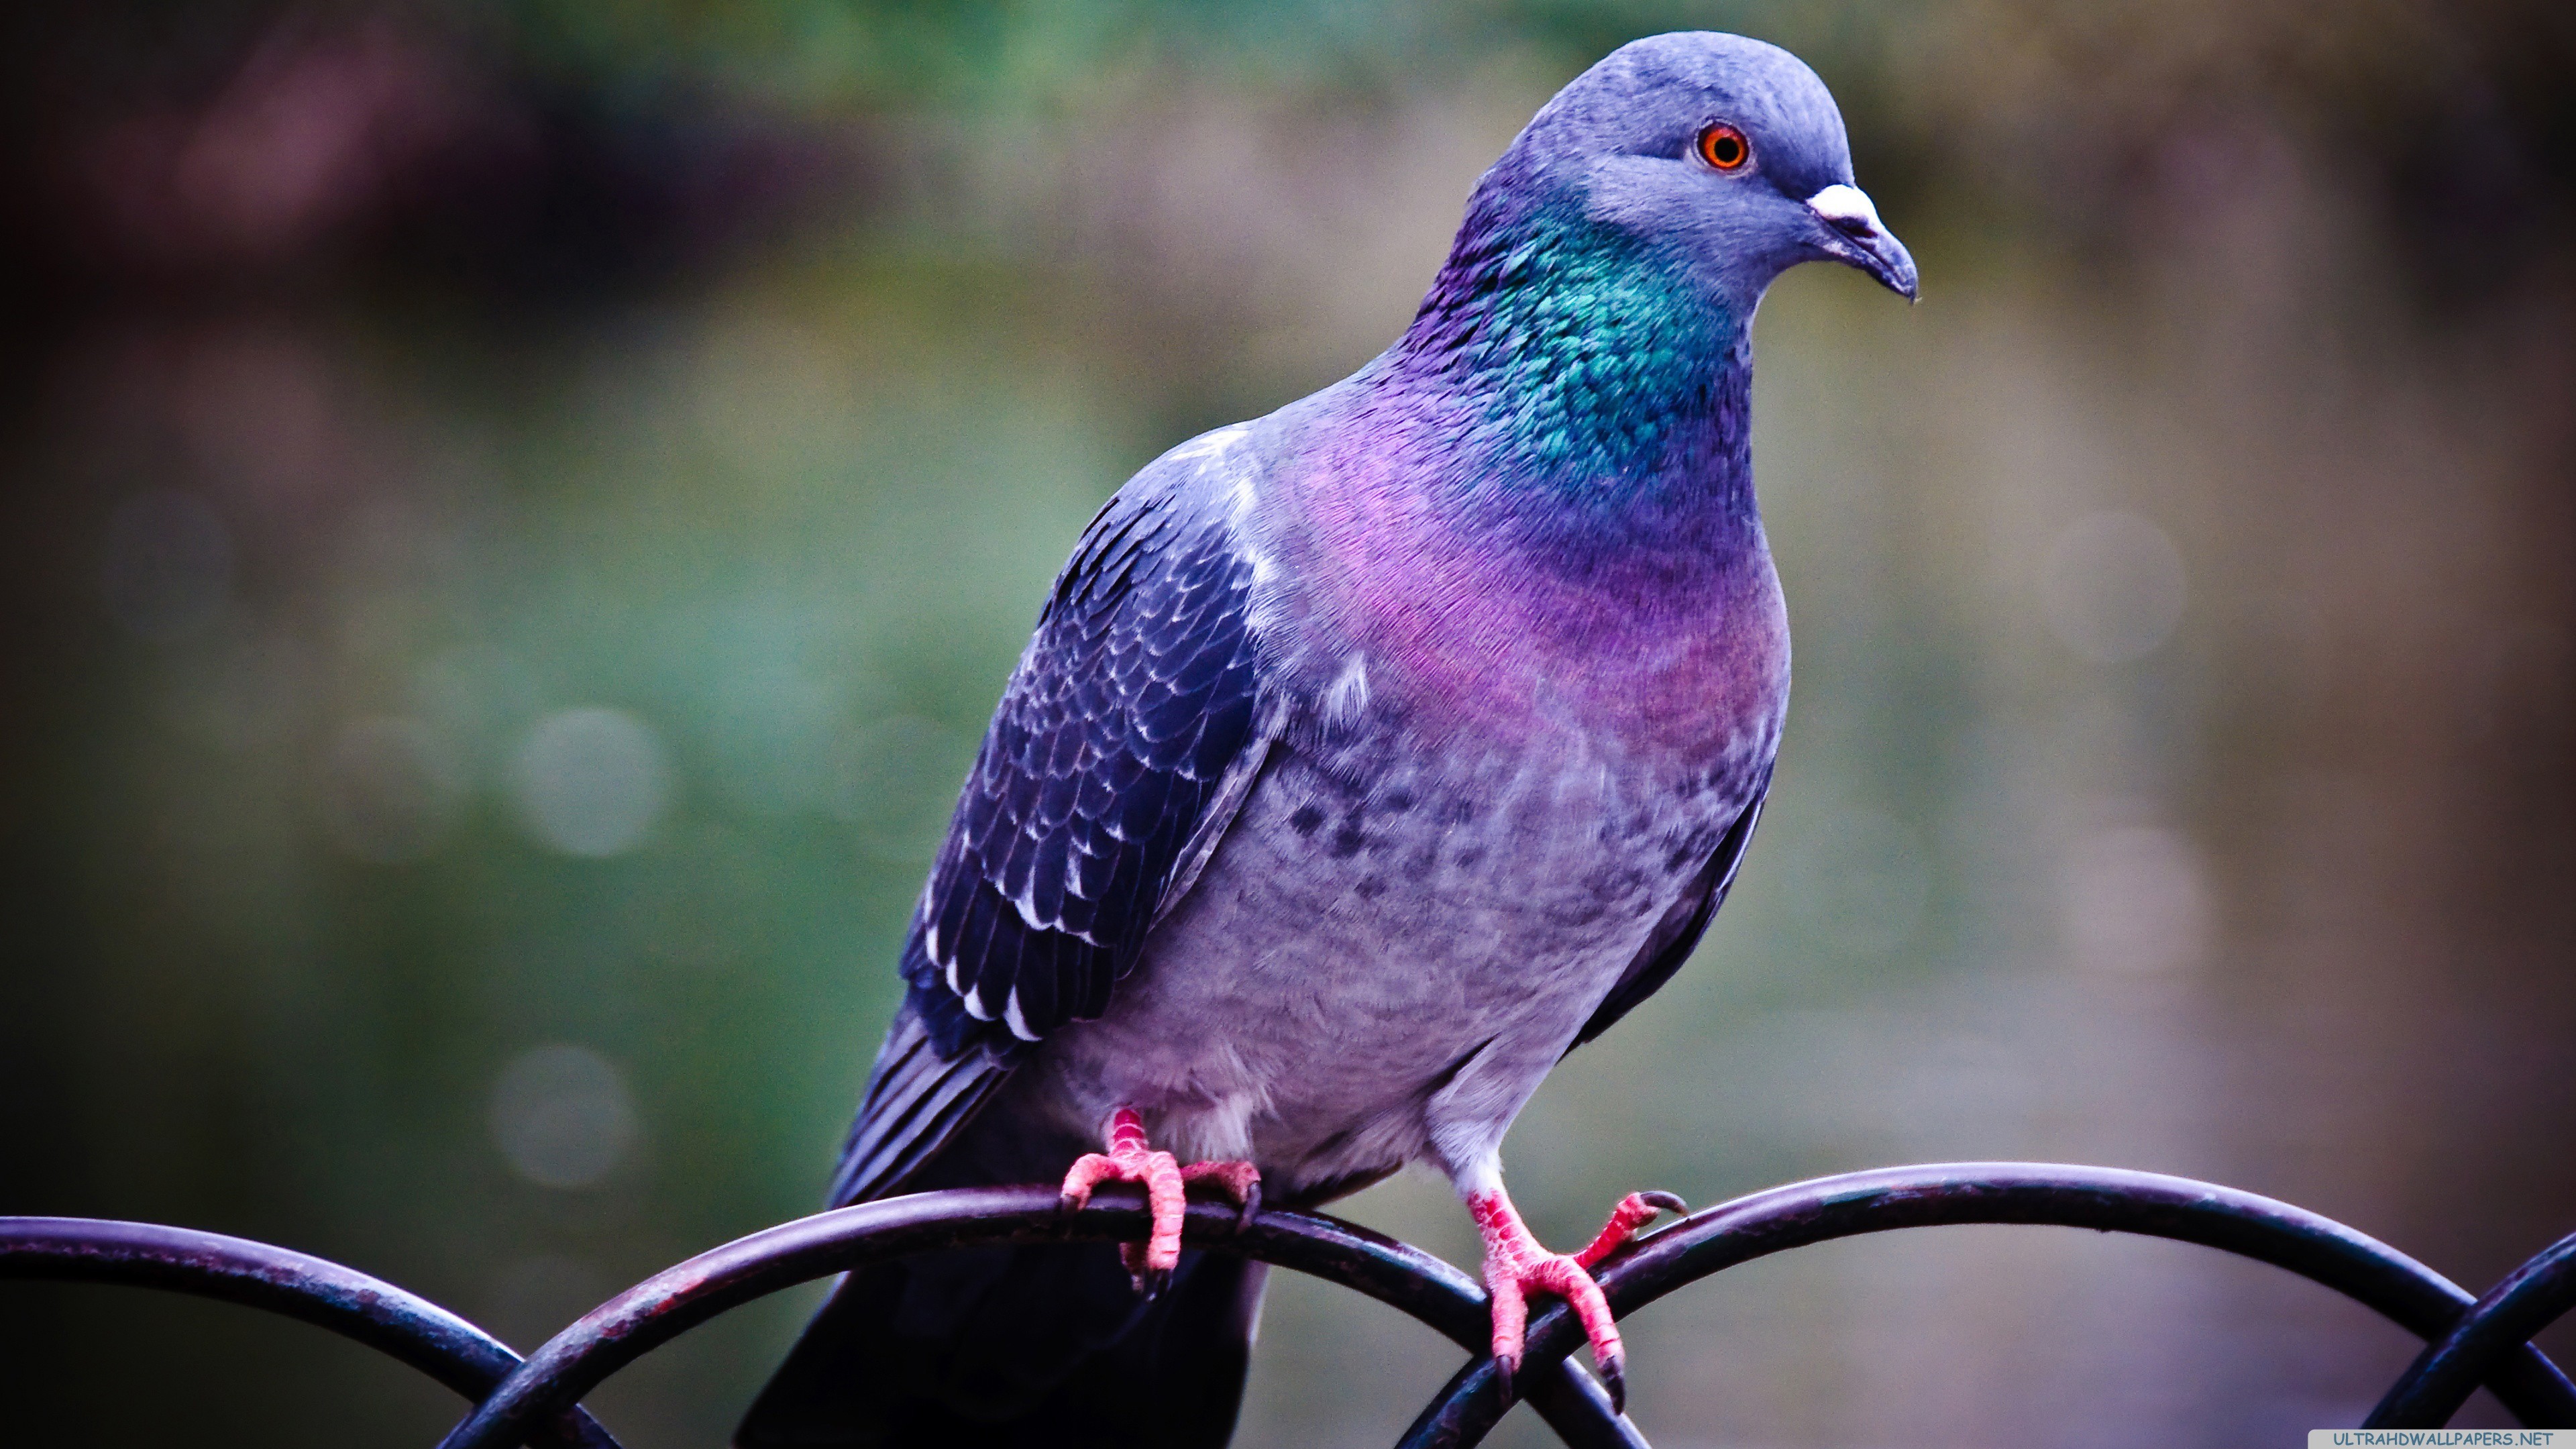 General 3840x2160 animals birds colorful pigeons